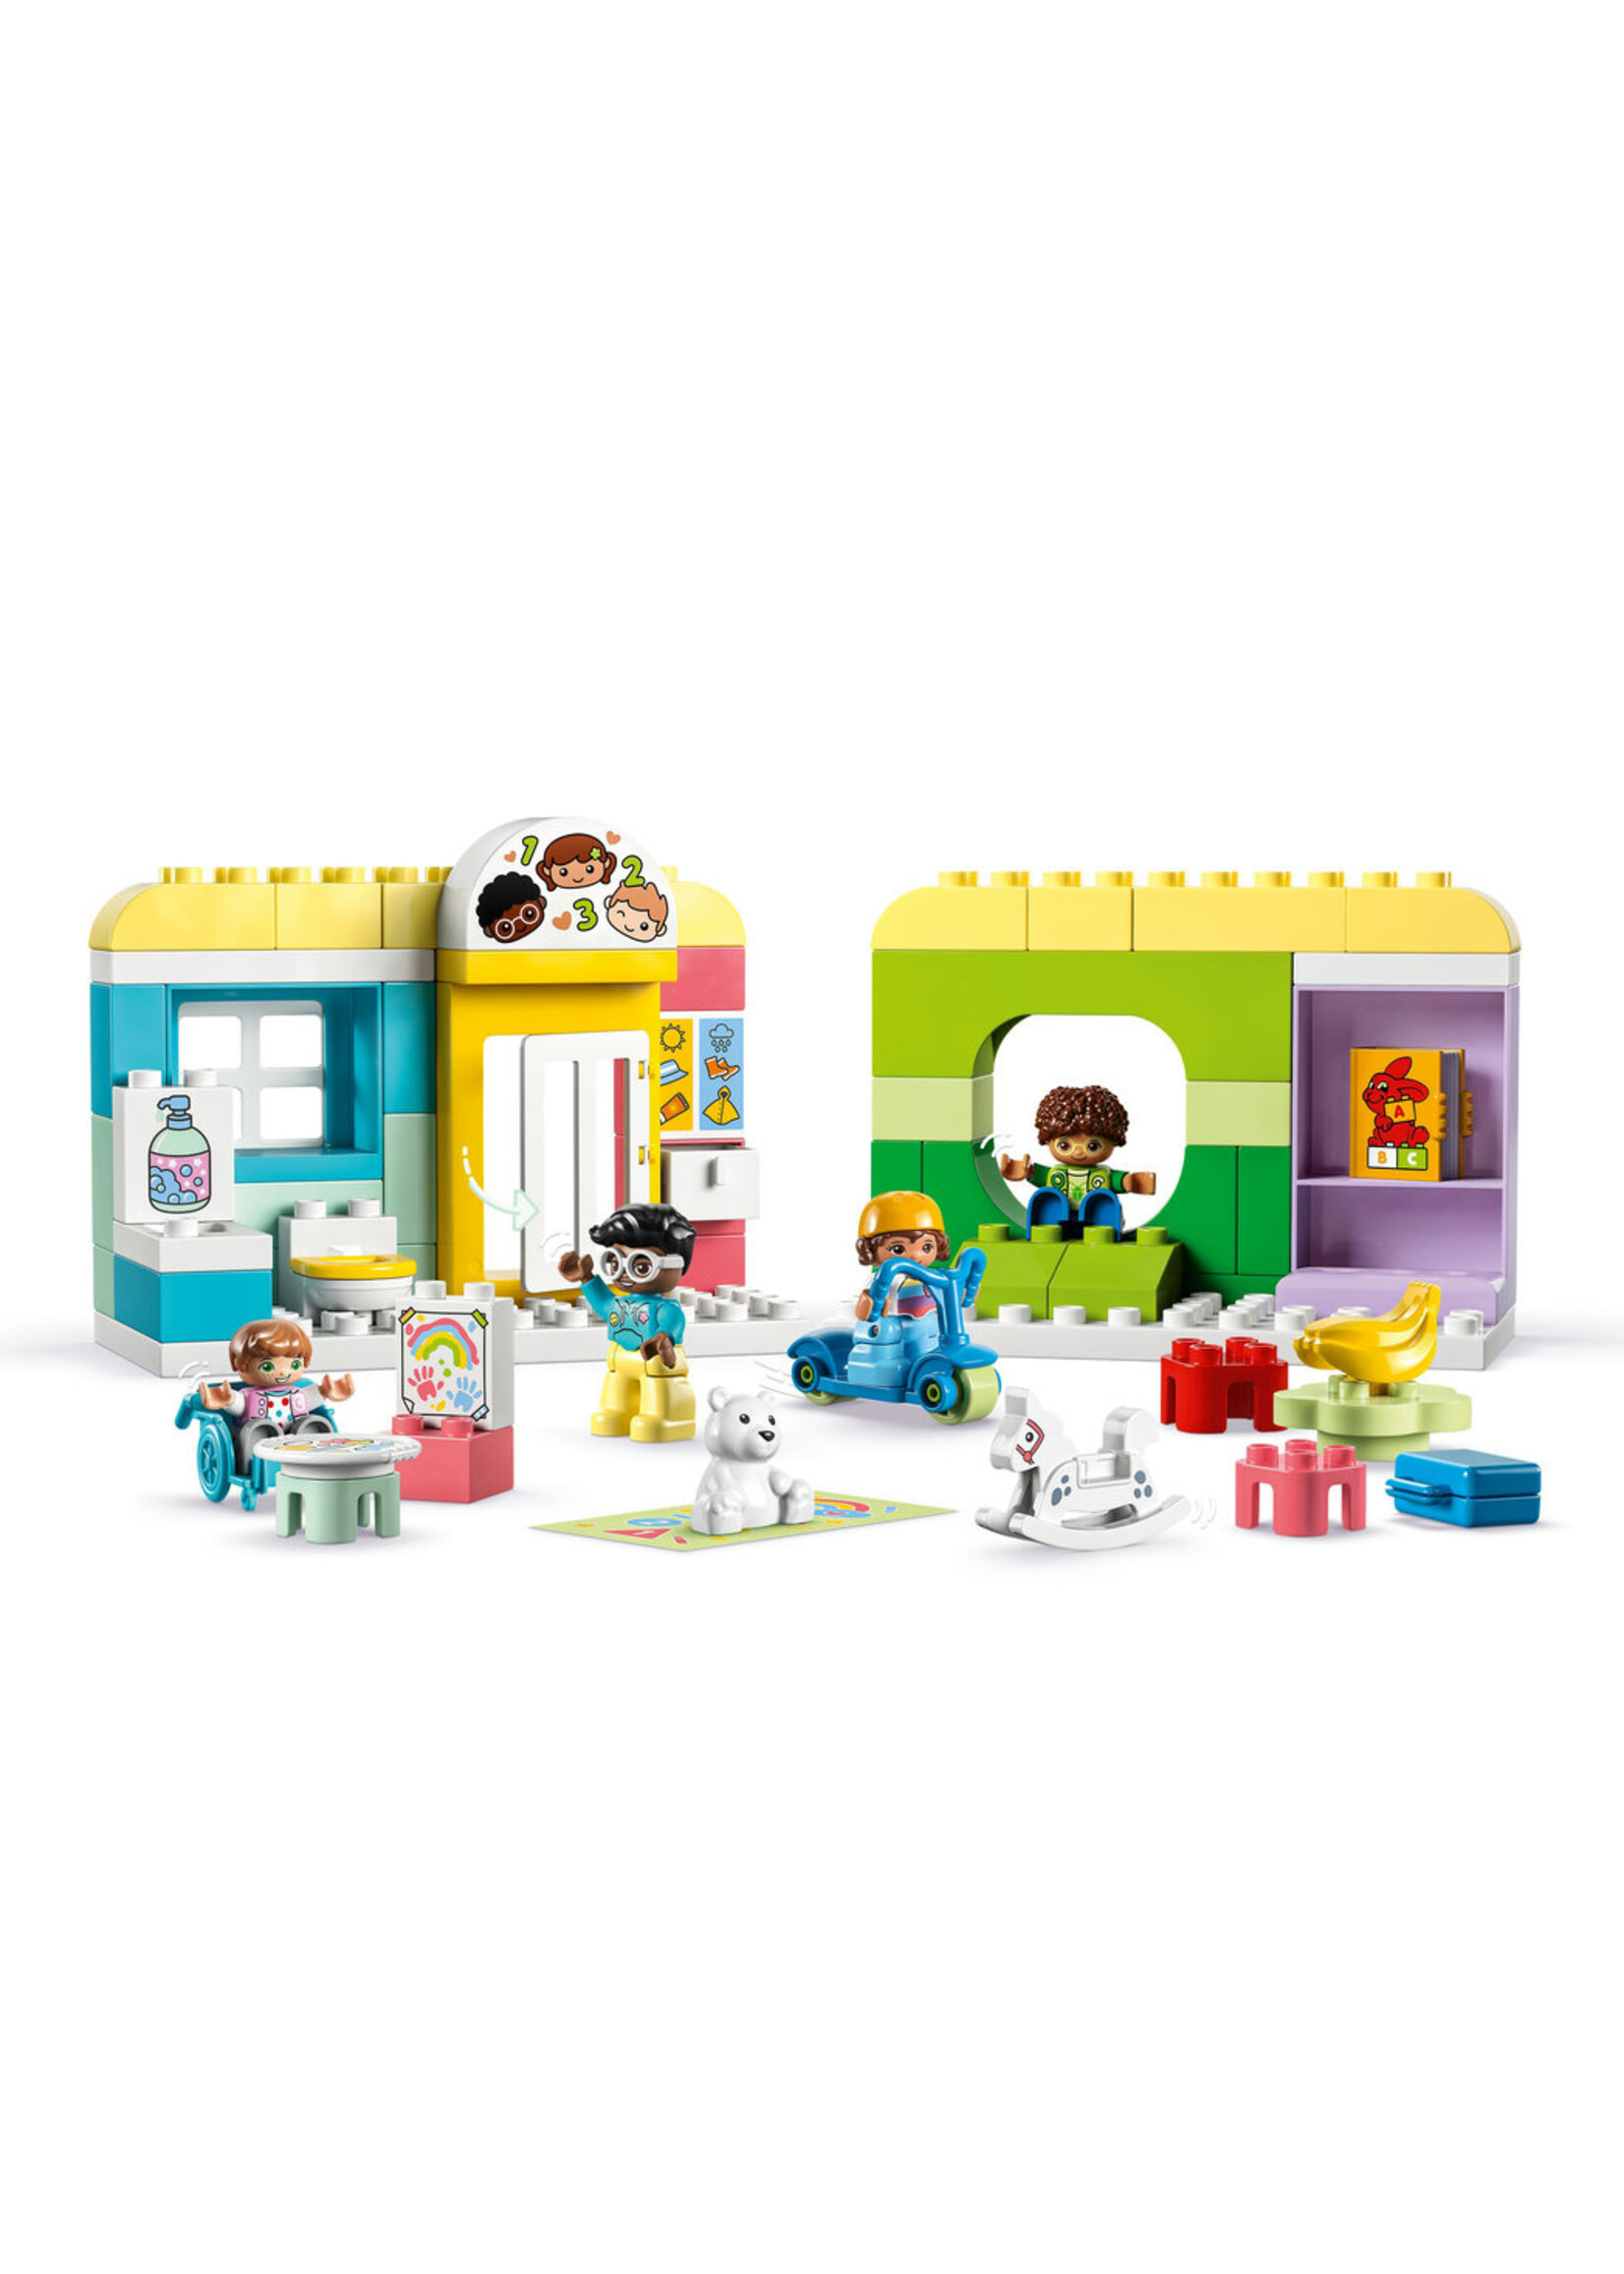 Life At The Day-Care Center 10992, DUPLO®